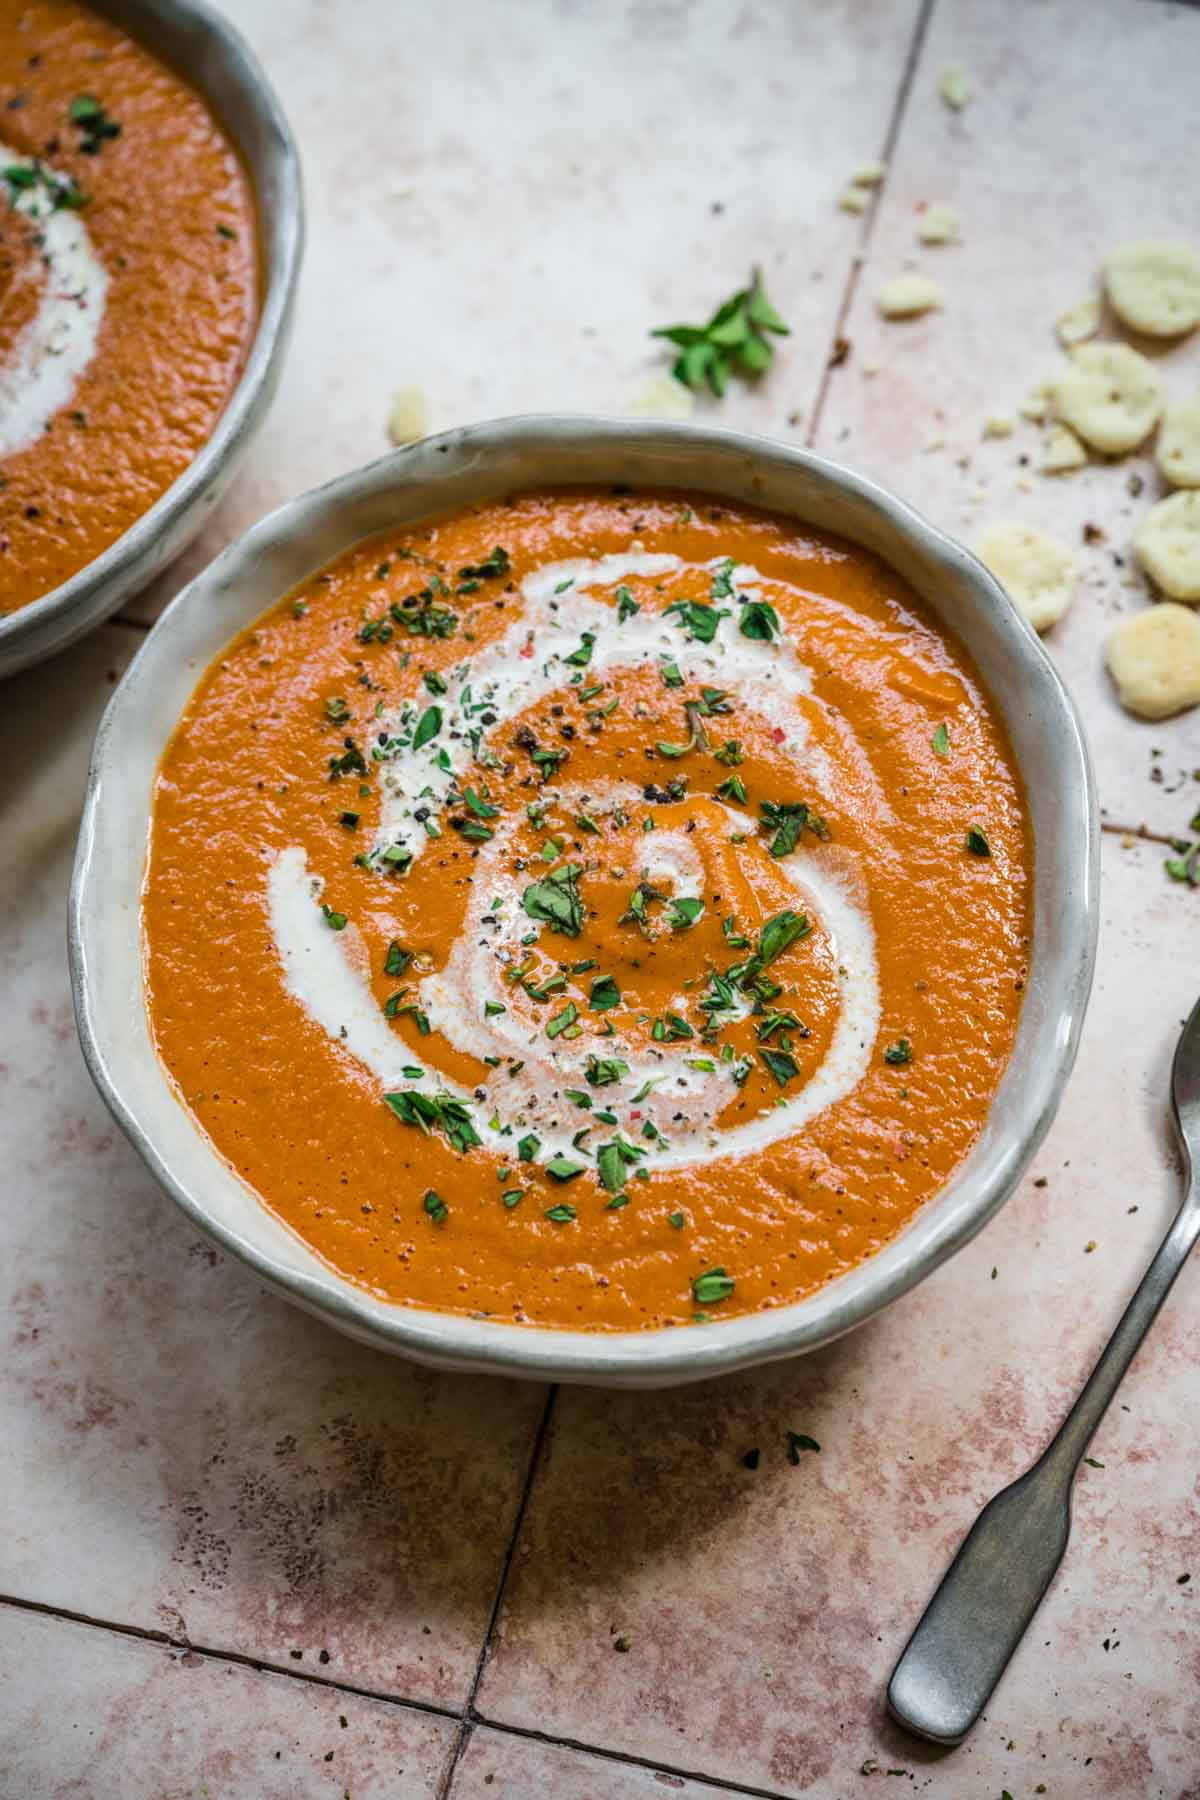 Tomato soup with a swirl of cream in a bowl with a spoon by its side.